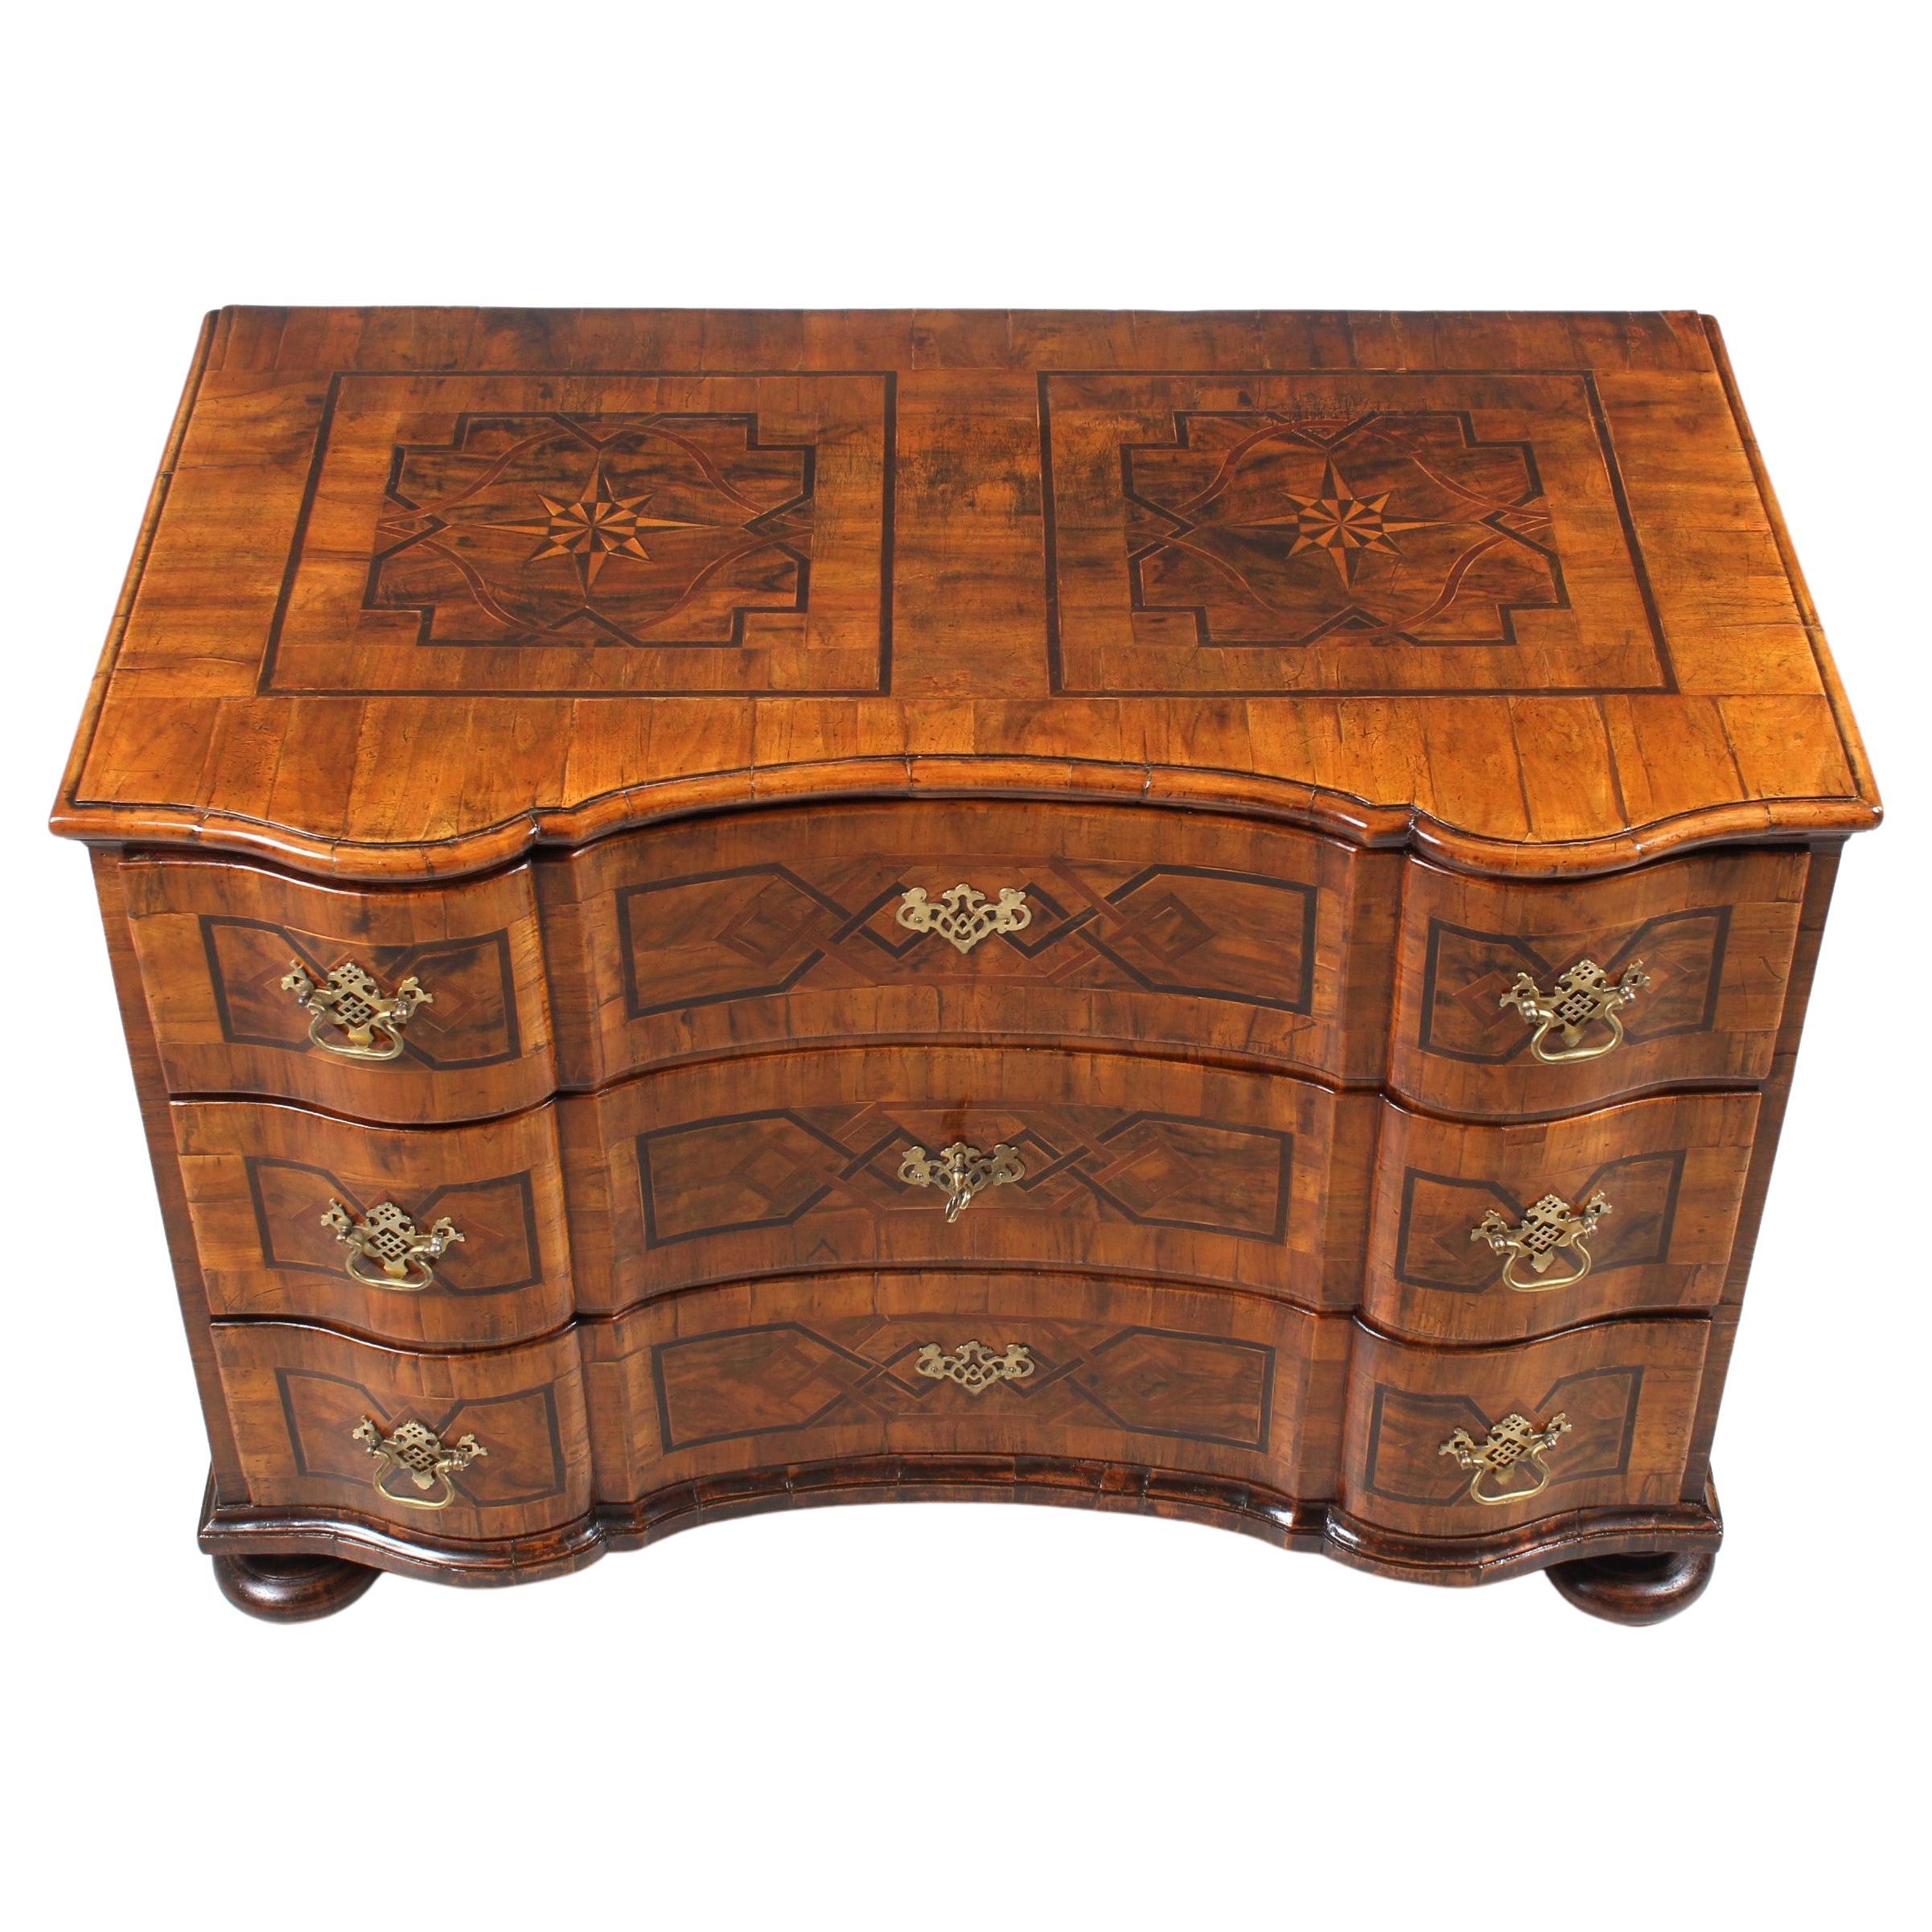 18th Century German Baroque Chest of Drawers with Fantastic Patina